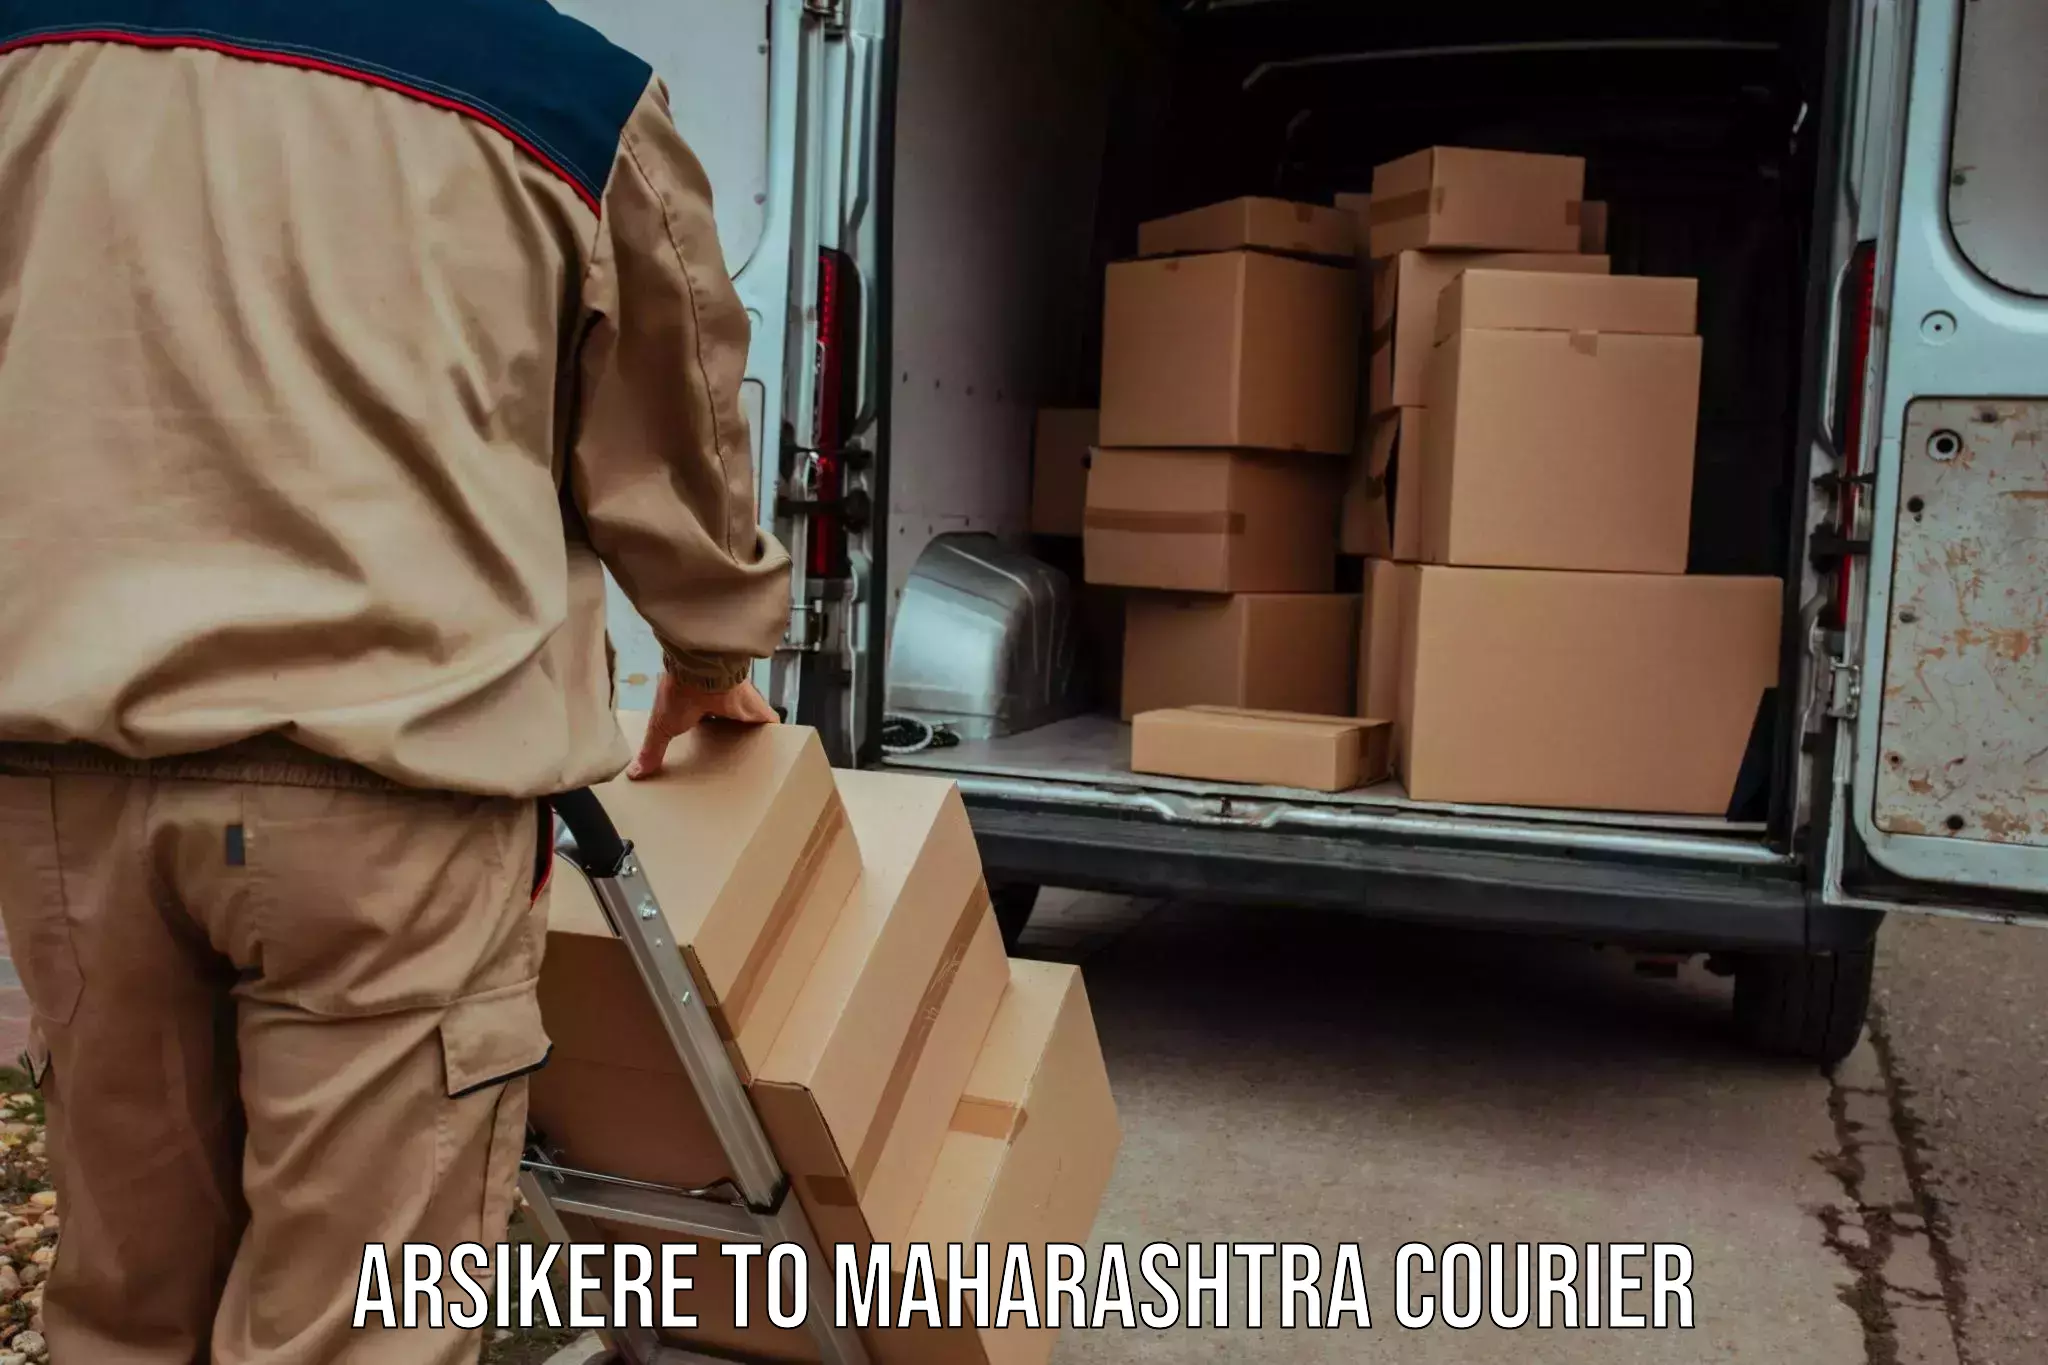 24-hour courier service Arsikere to Maharashtra